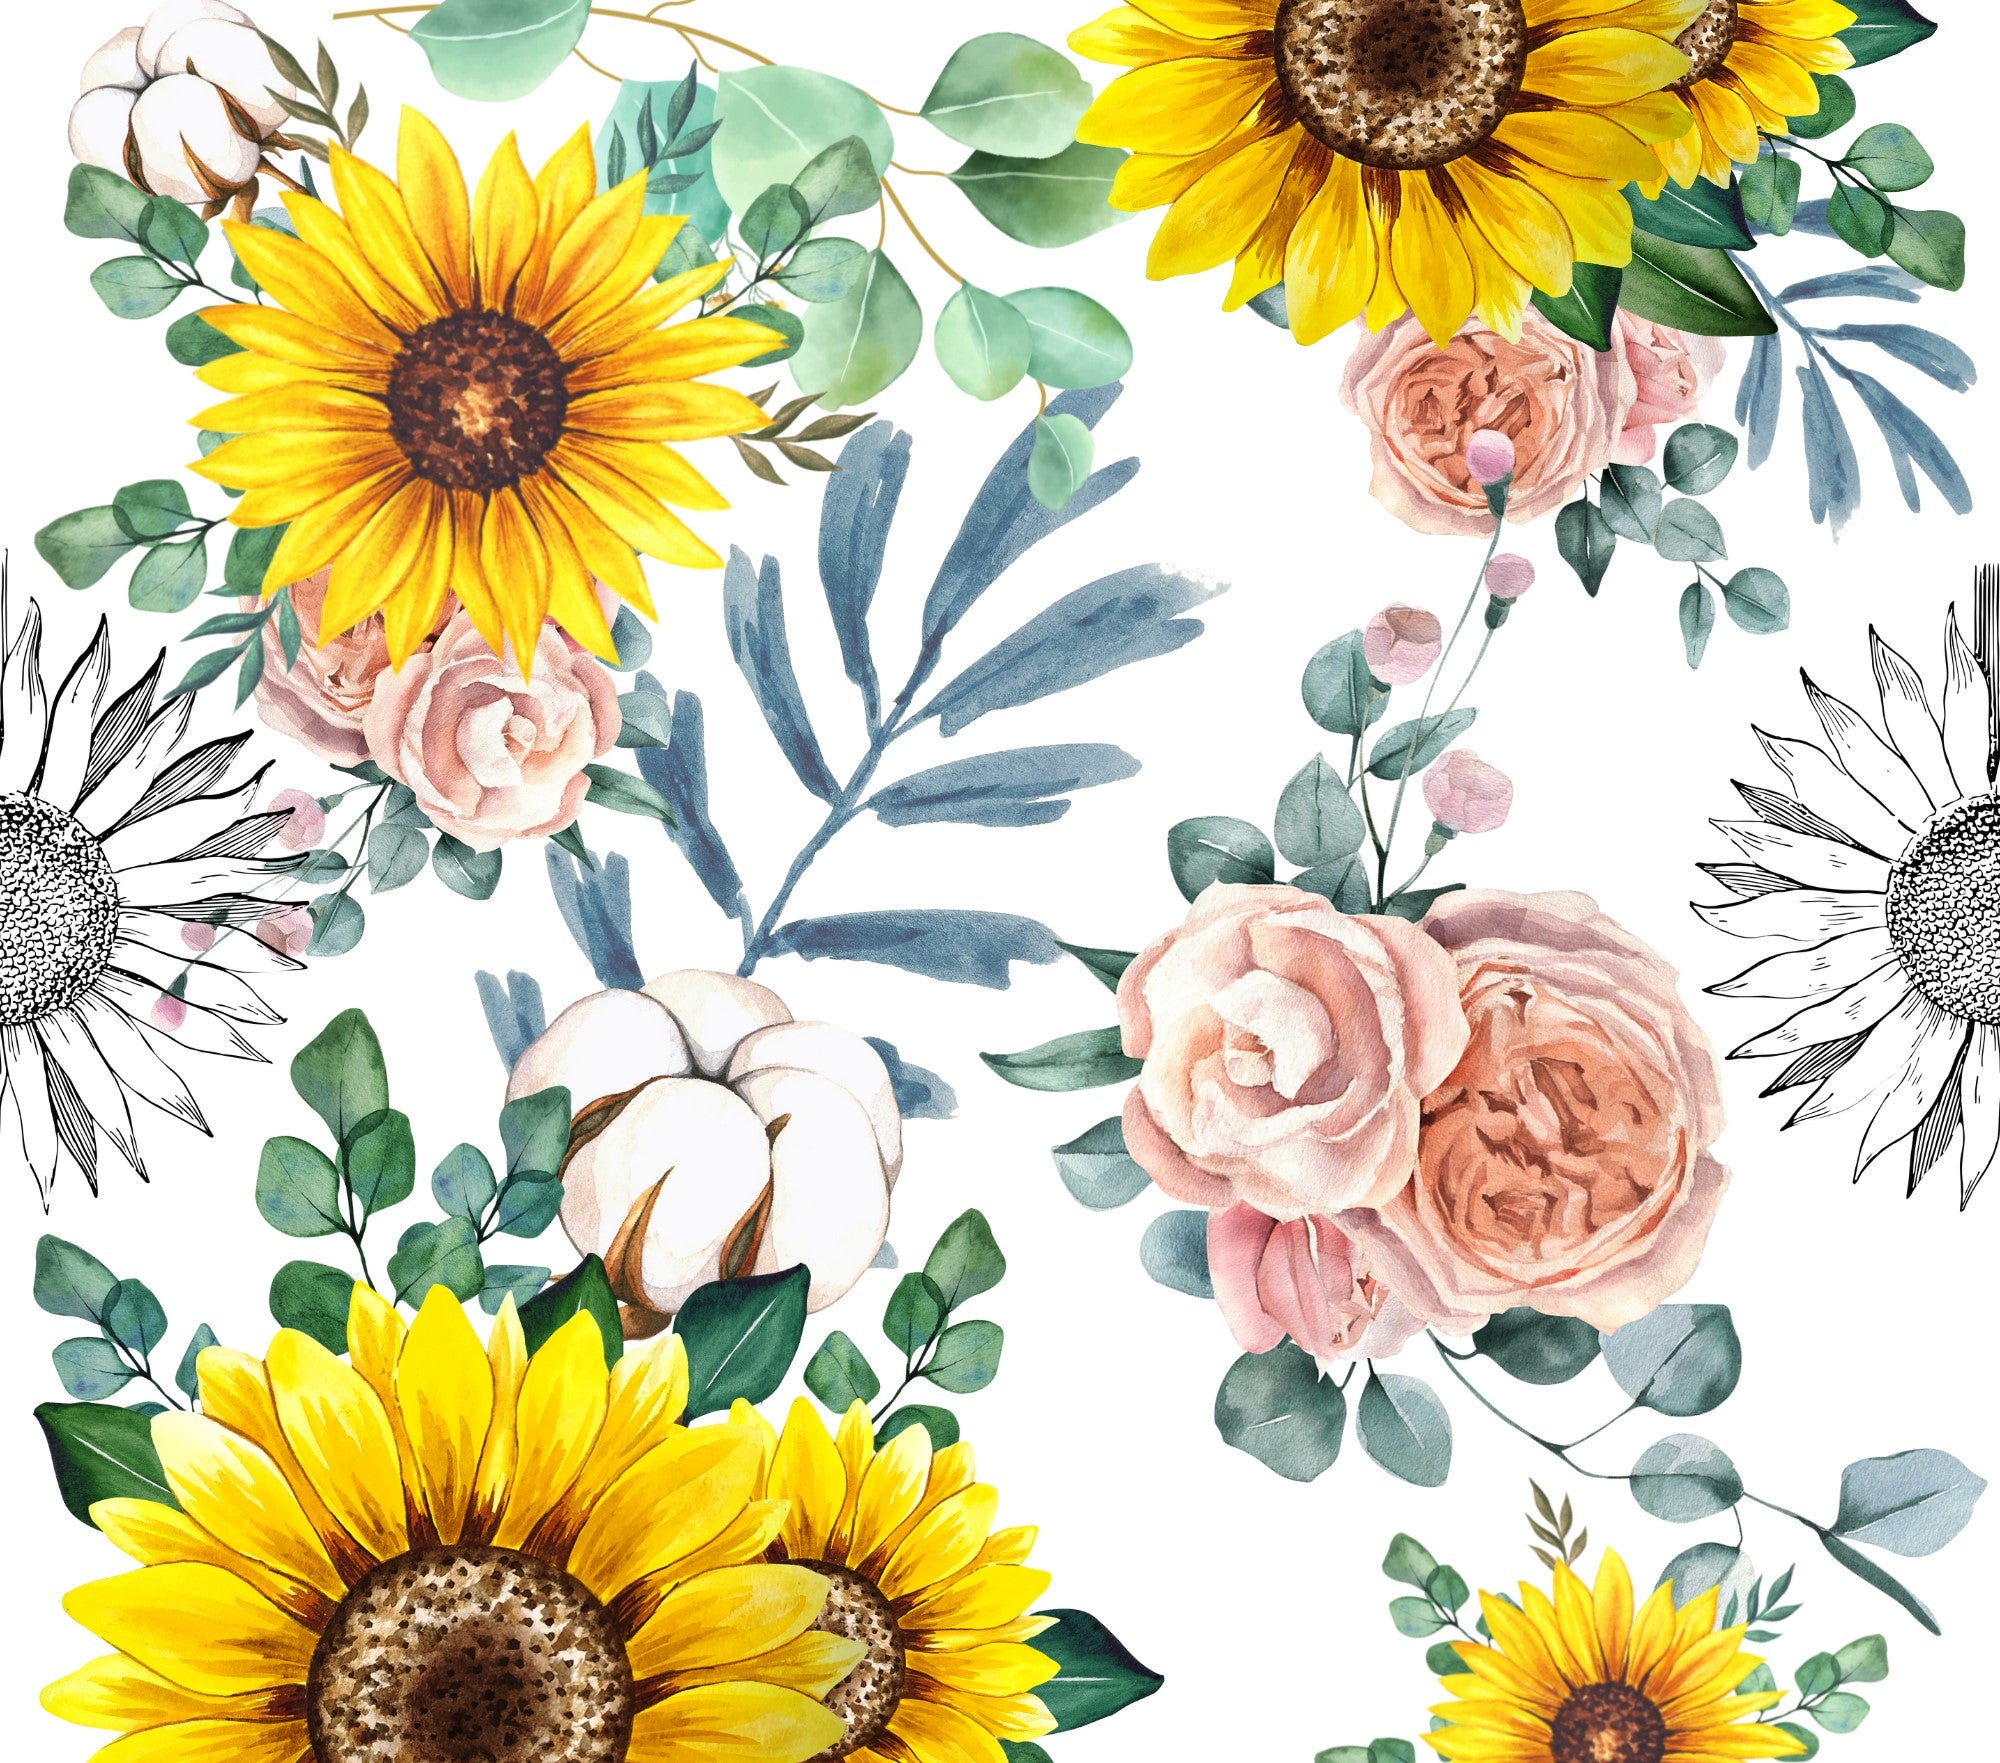 Sublimation Tumbler Wrap - Sunflowers and Roses - The Vinyl Haus